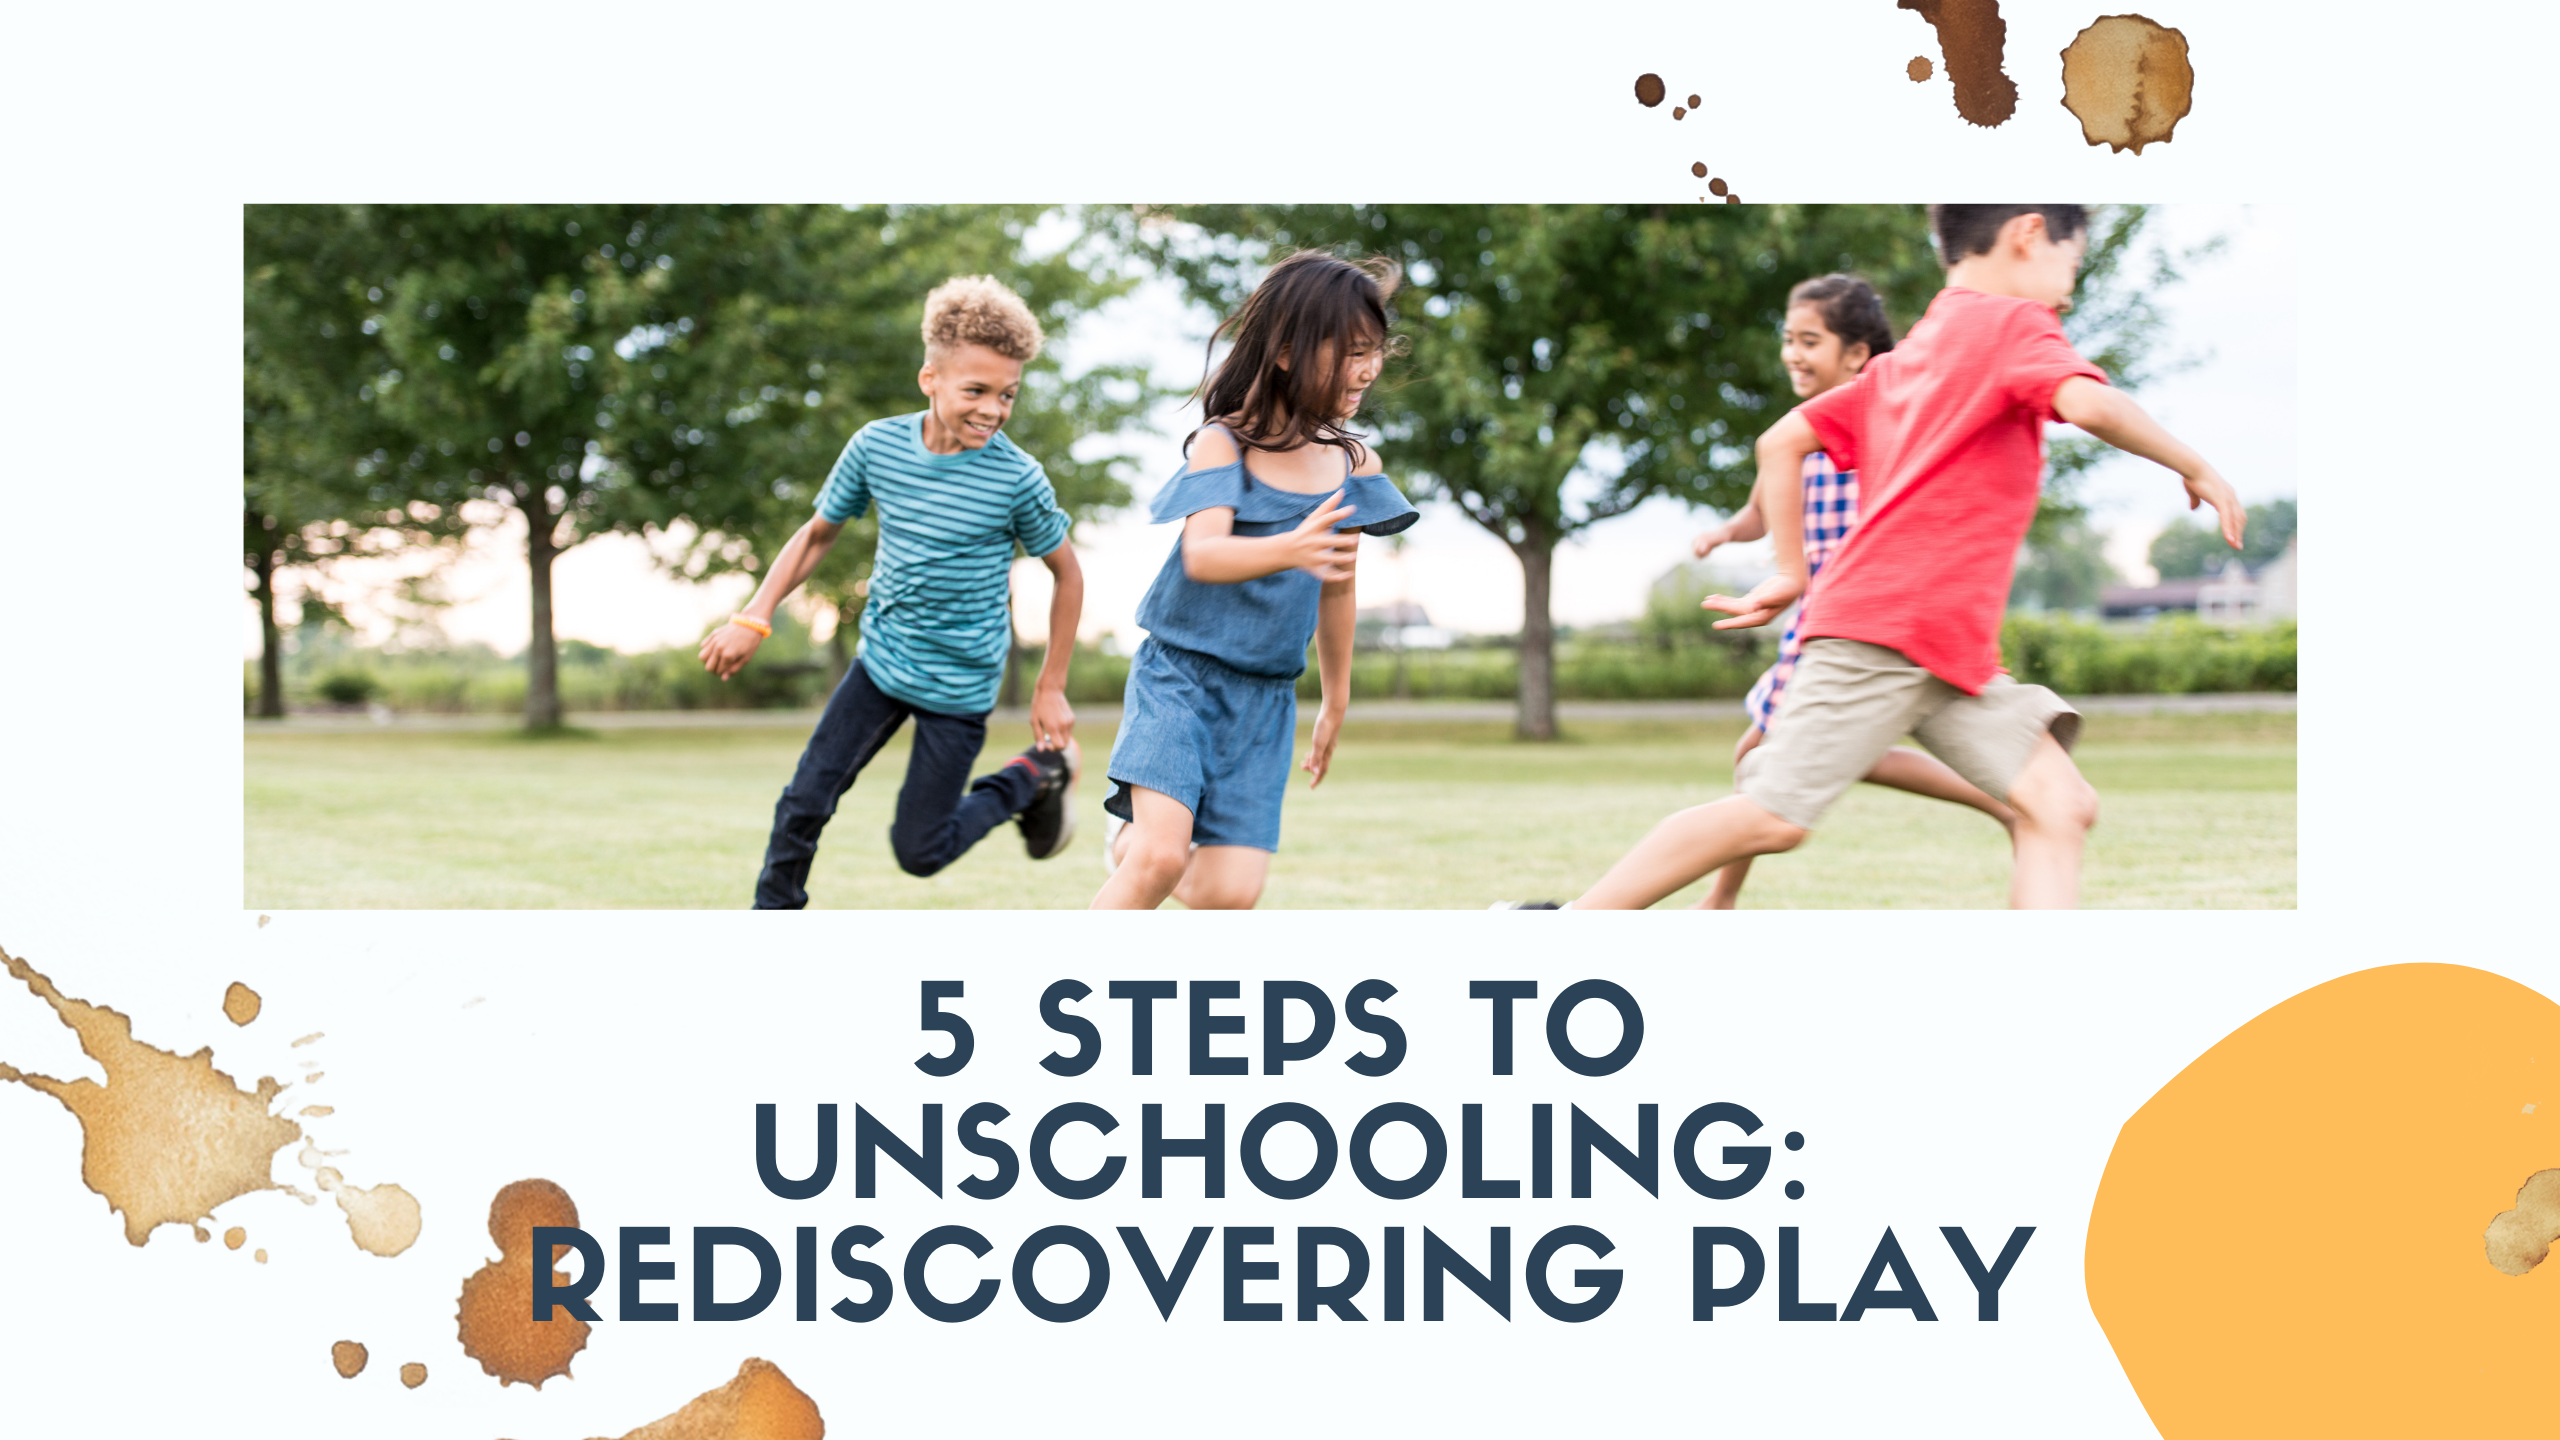 5 Steps to Unschooling: Rediscovering Play